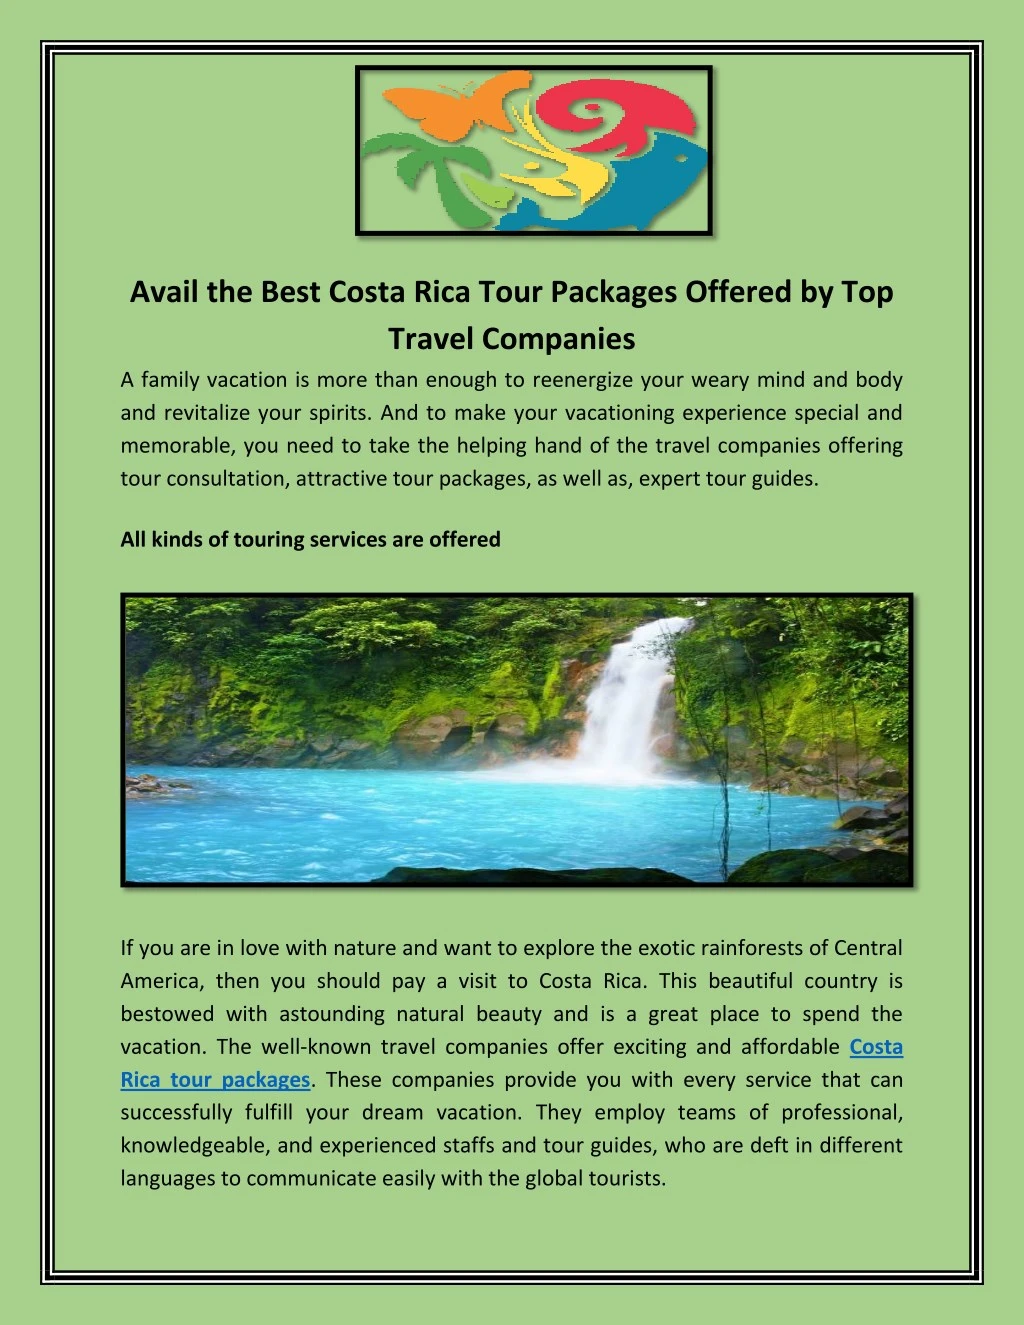 avail the best costa rica tour packages offered